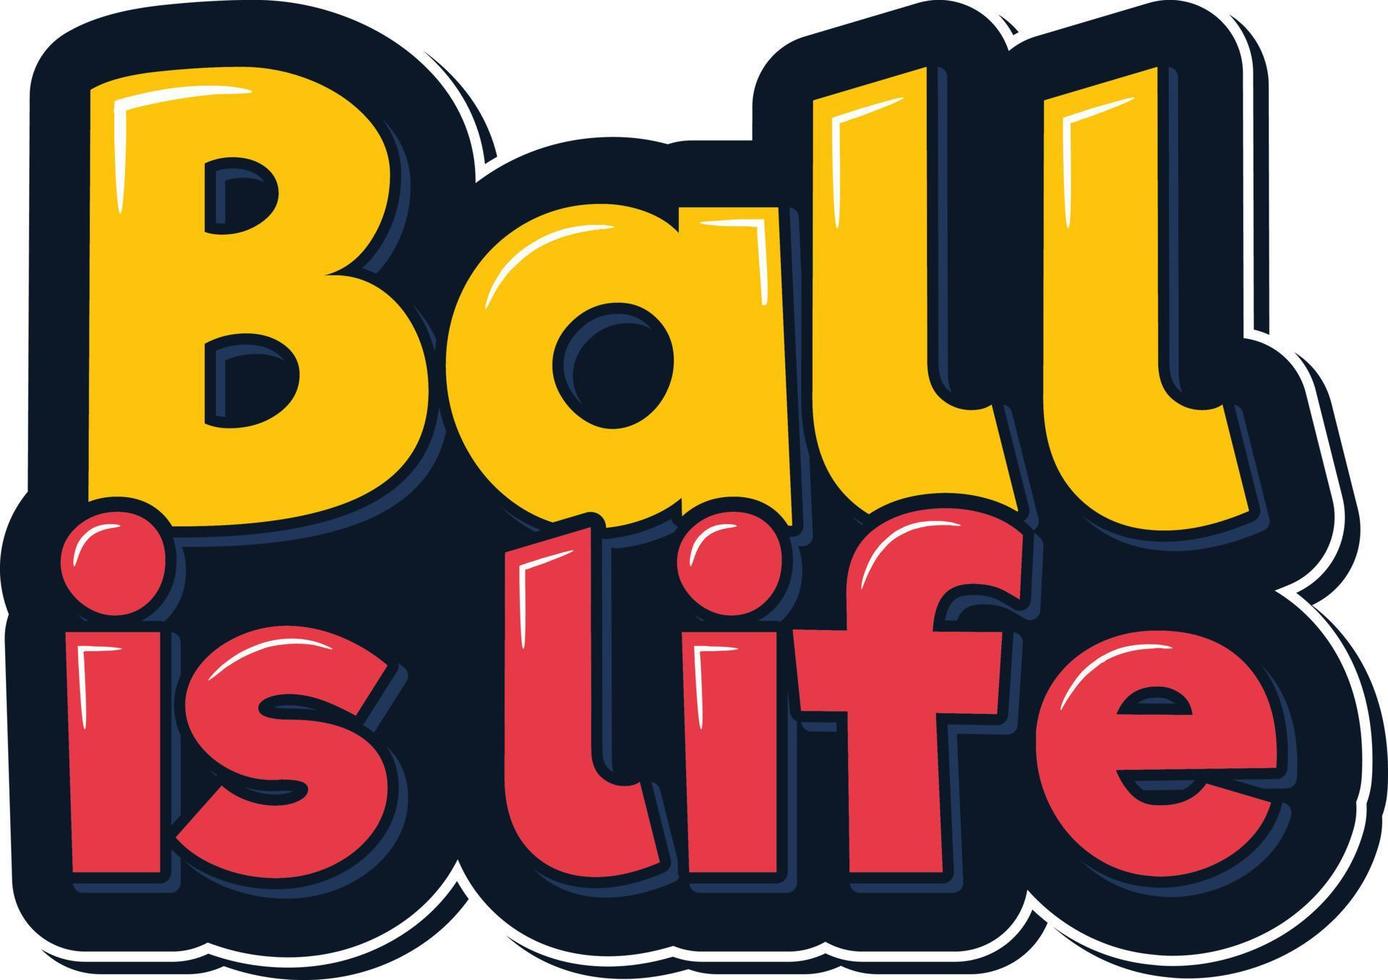 Ball is Life Lettering Vector Design